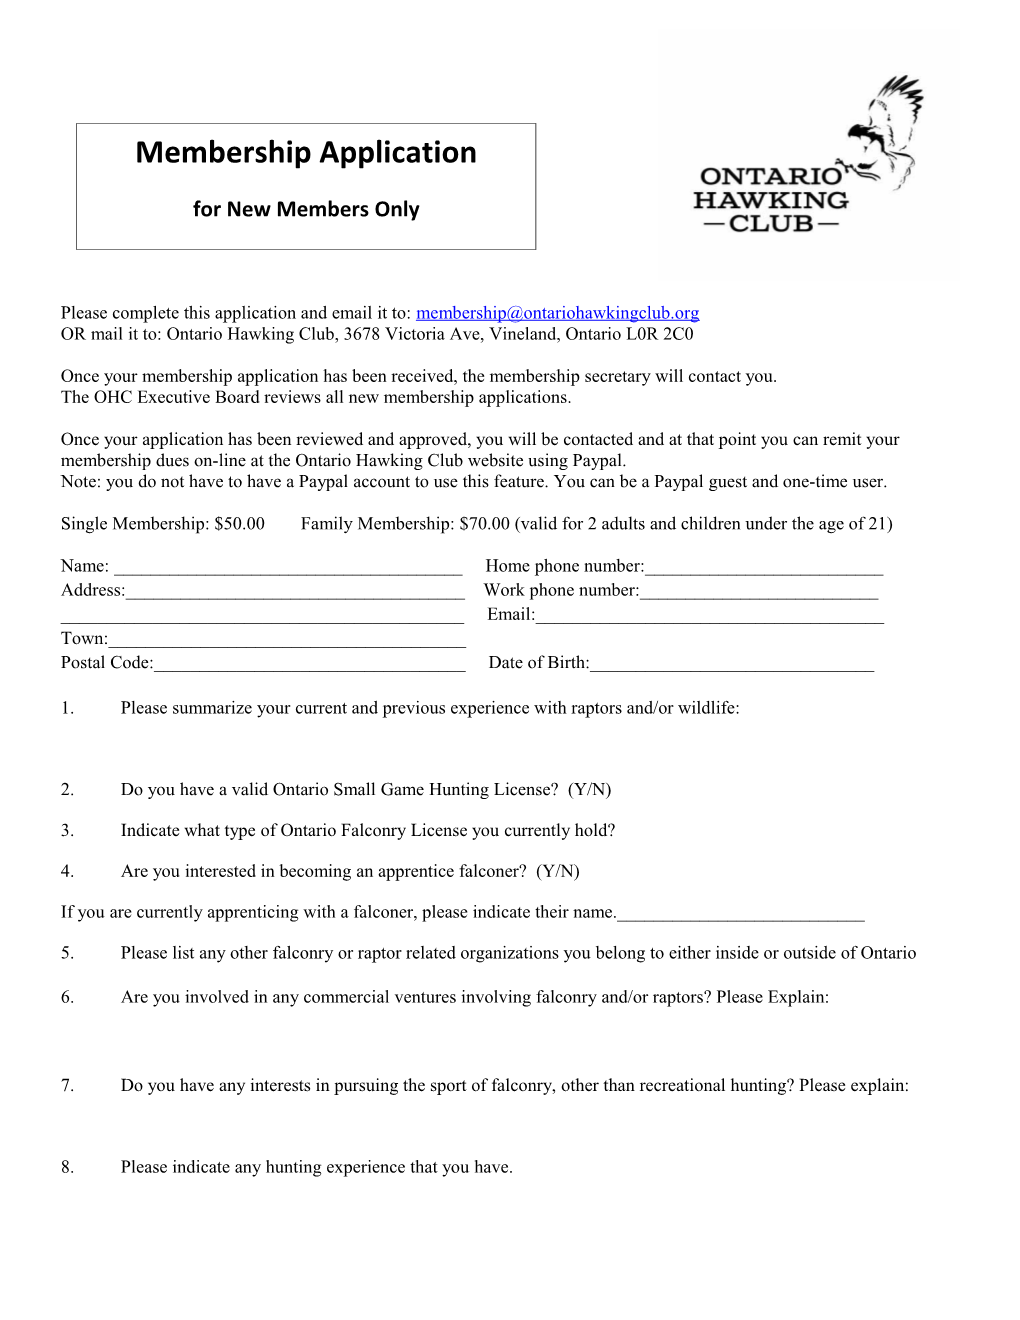 Please Complete This Application and Email It To